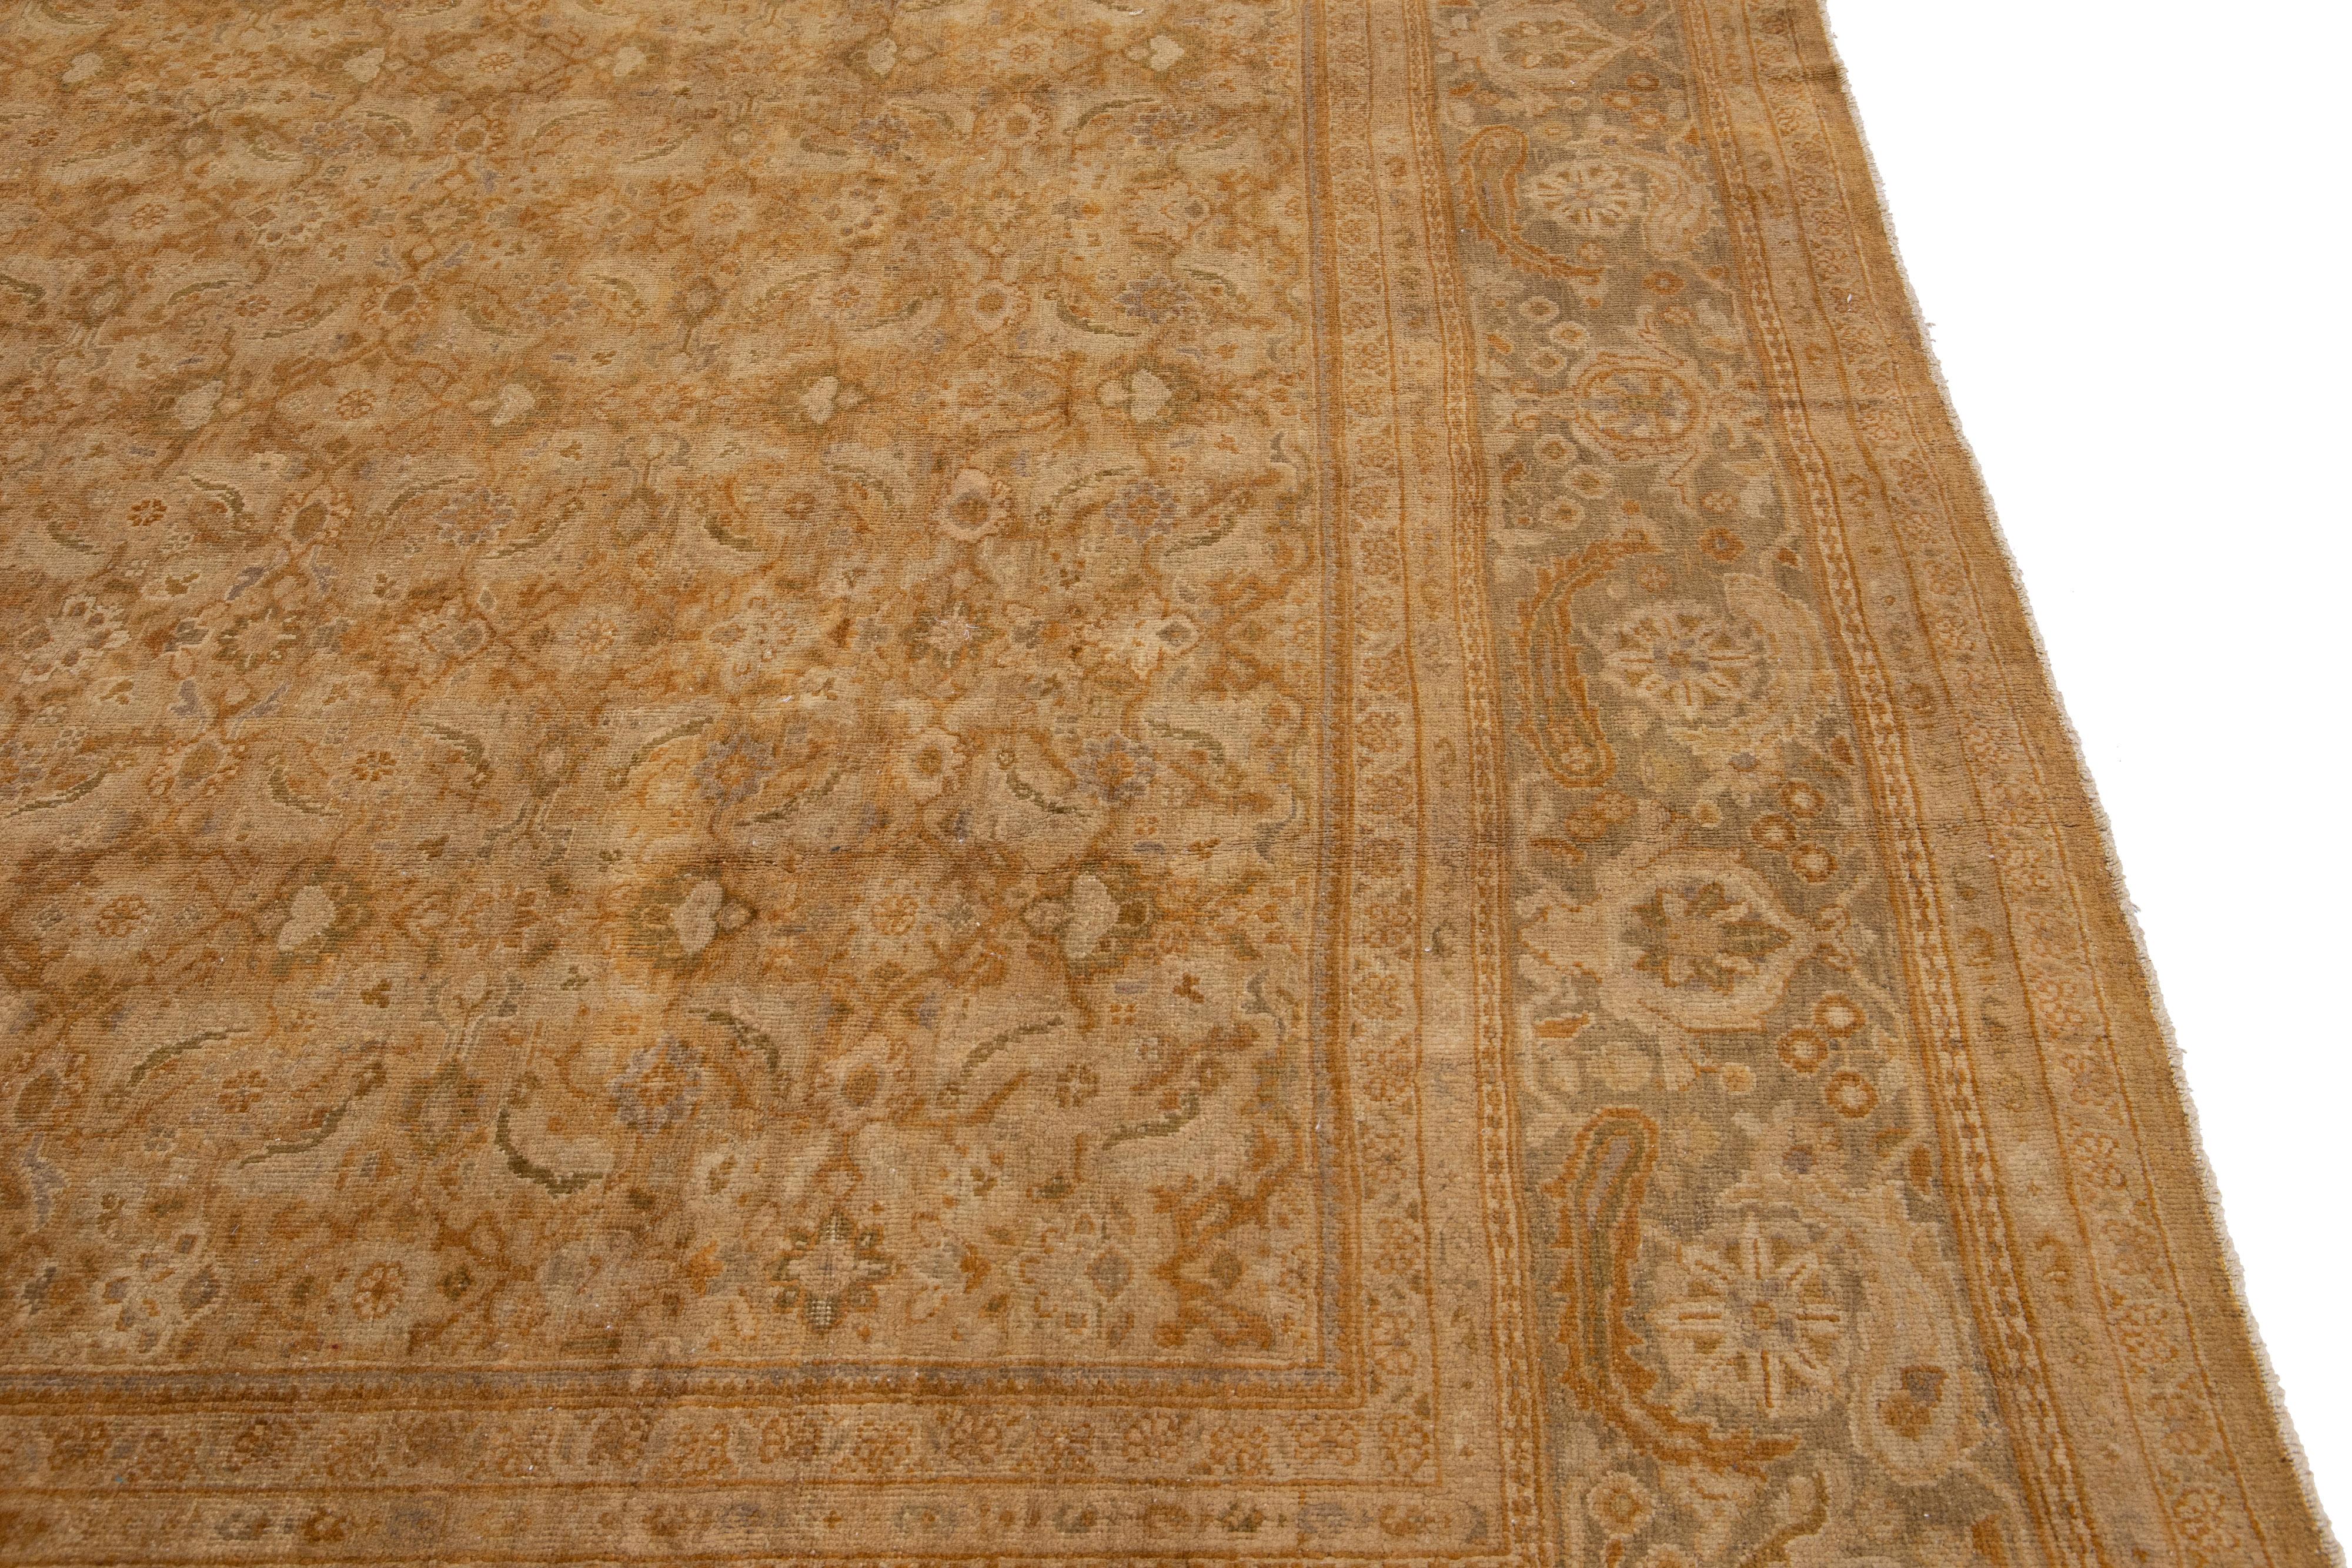 19th Century Antique Sultanabad Handmade Tan Wool Rug with Allover Floral Design For Sale